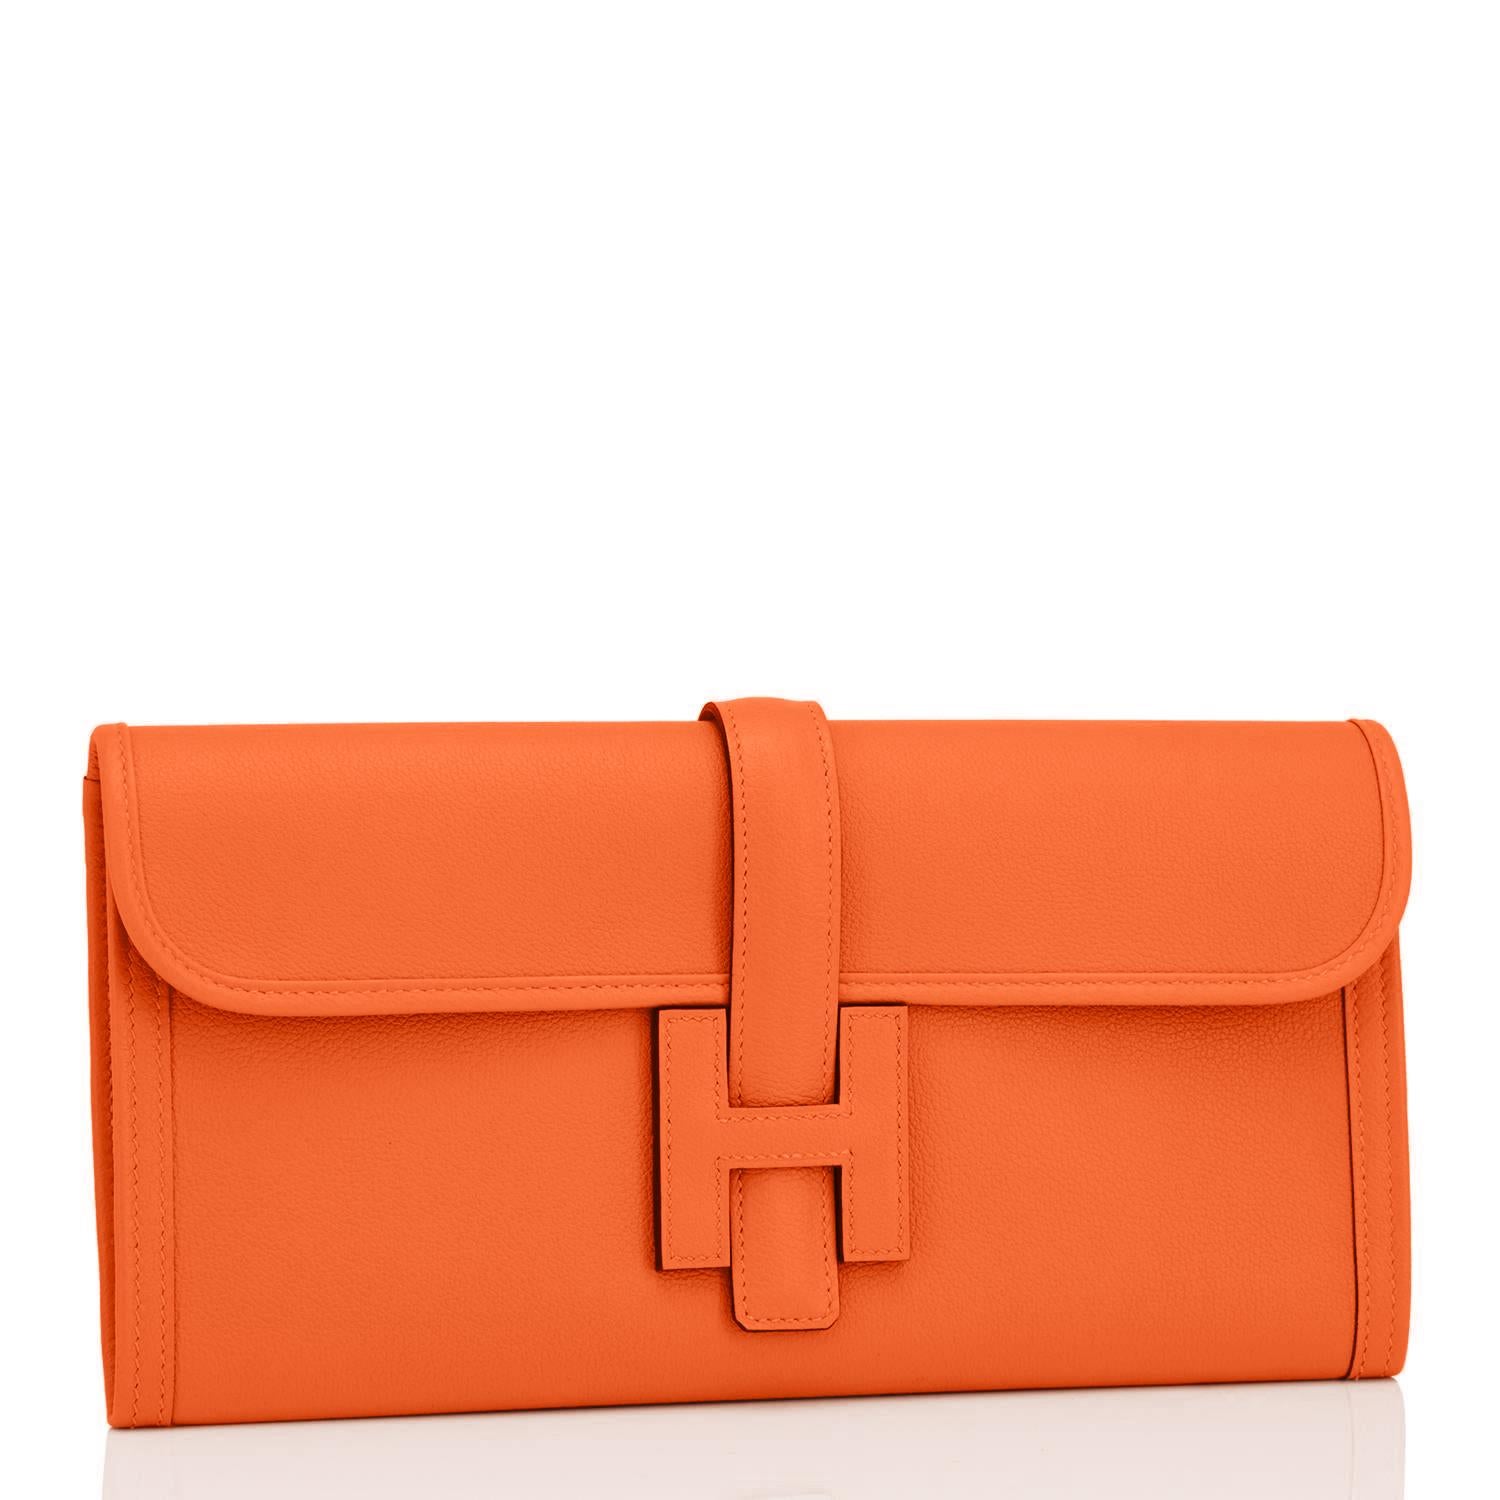 Hermes Classic Orange Jige Elan Clutch Bag 29cm NEW RARE
Perfect Gift!  New or Never Worn. Pristine condition.  
Comes in full set with Hermes dust bag, Hermes ribbon, and Hermes box.
Classic Hermes Orange is perhaps the most loved color in Hermes